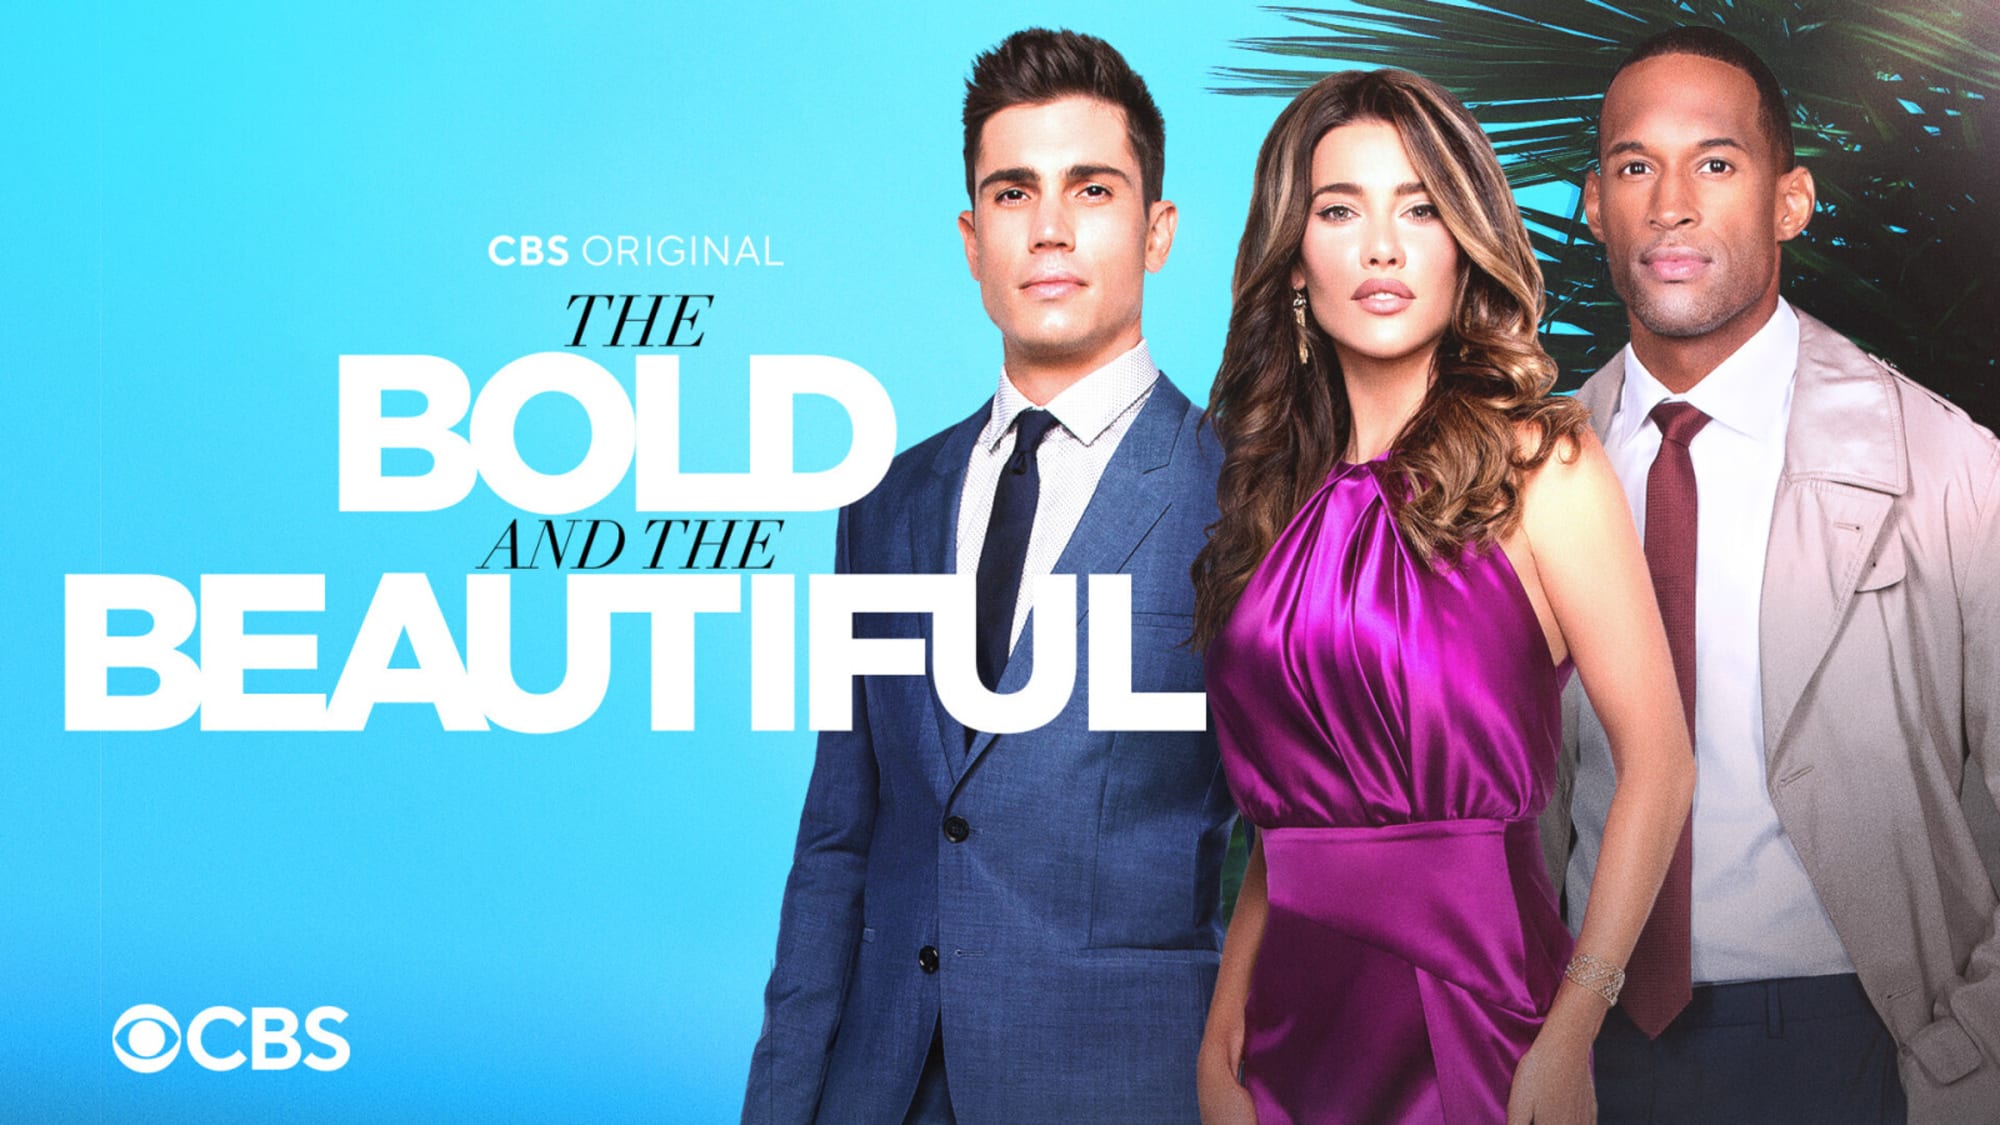 Who is RJ Forrester on The Bold and the Beautiful?